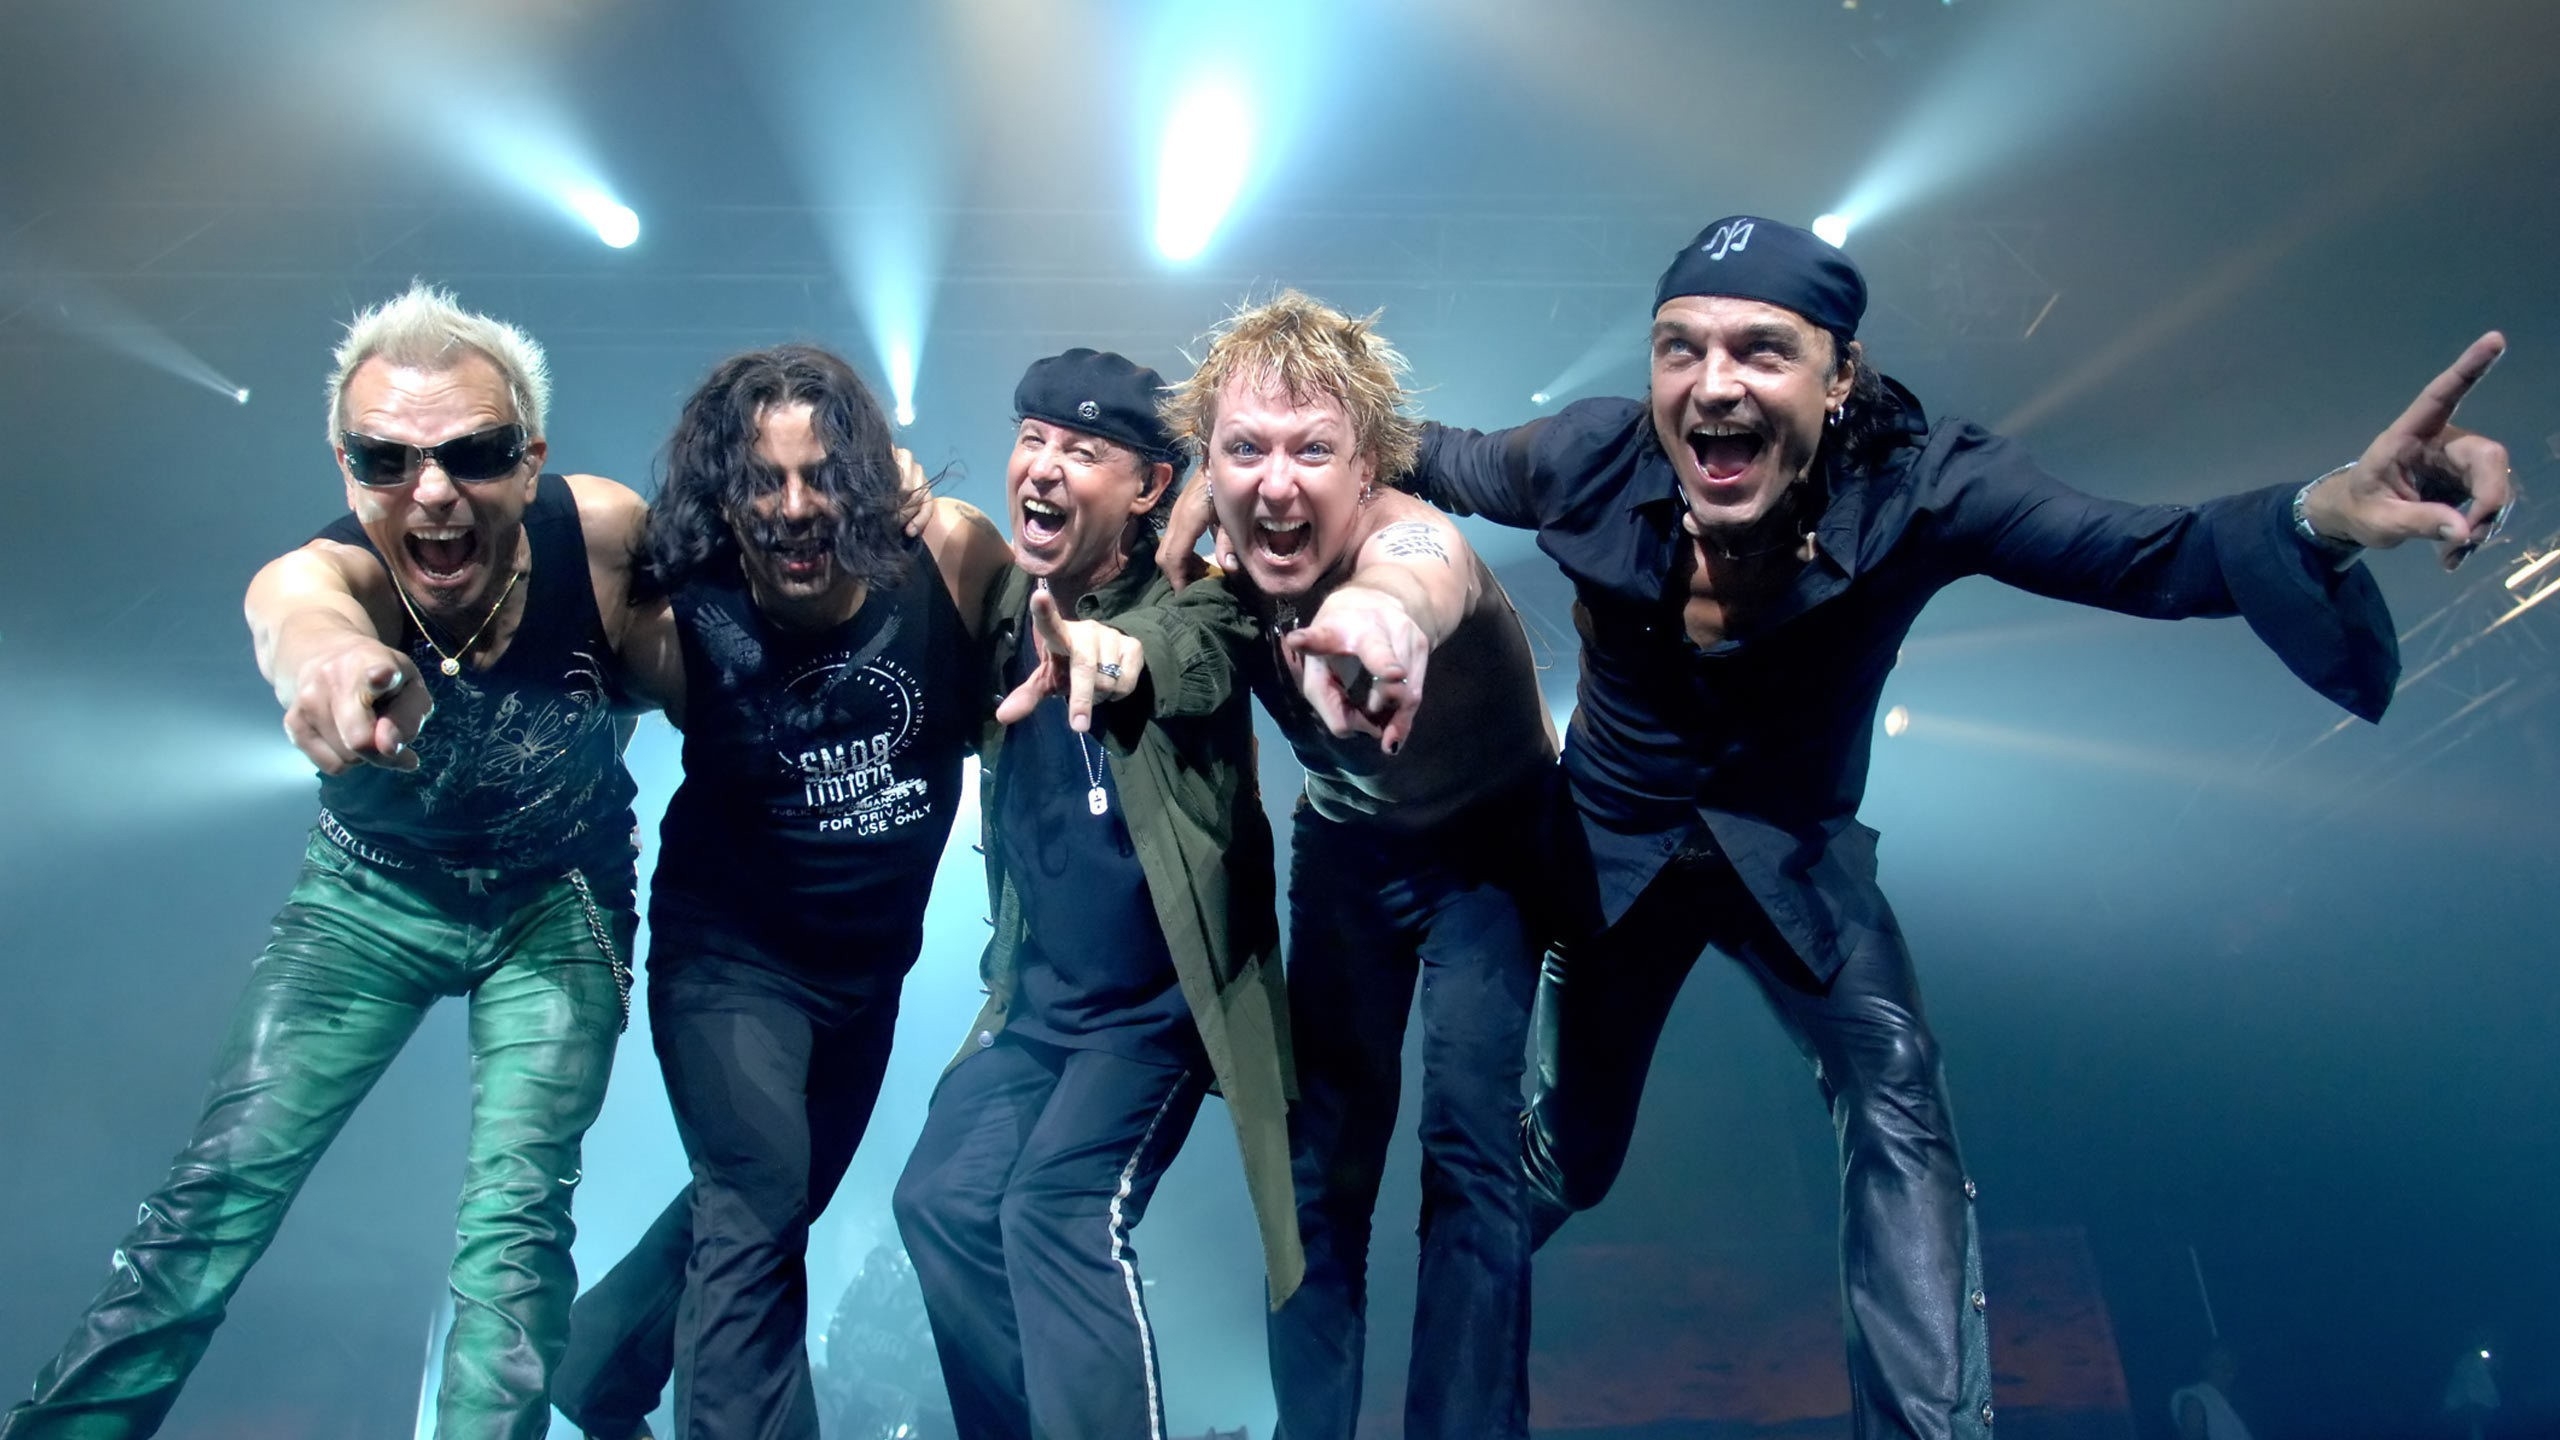 Scorpions Band Poster for 2560x1440 HDTV resolution